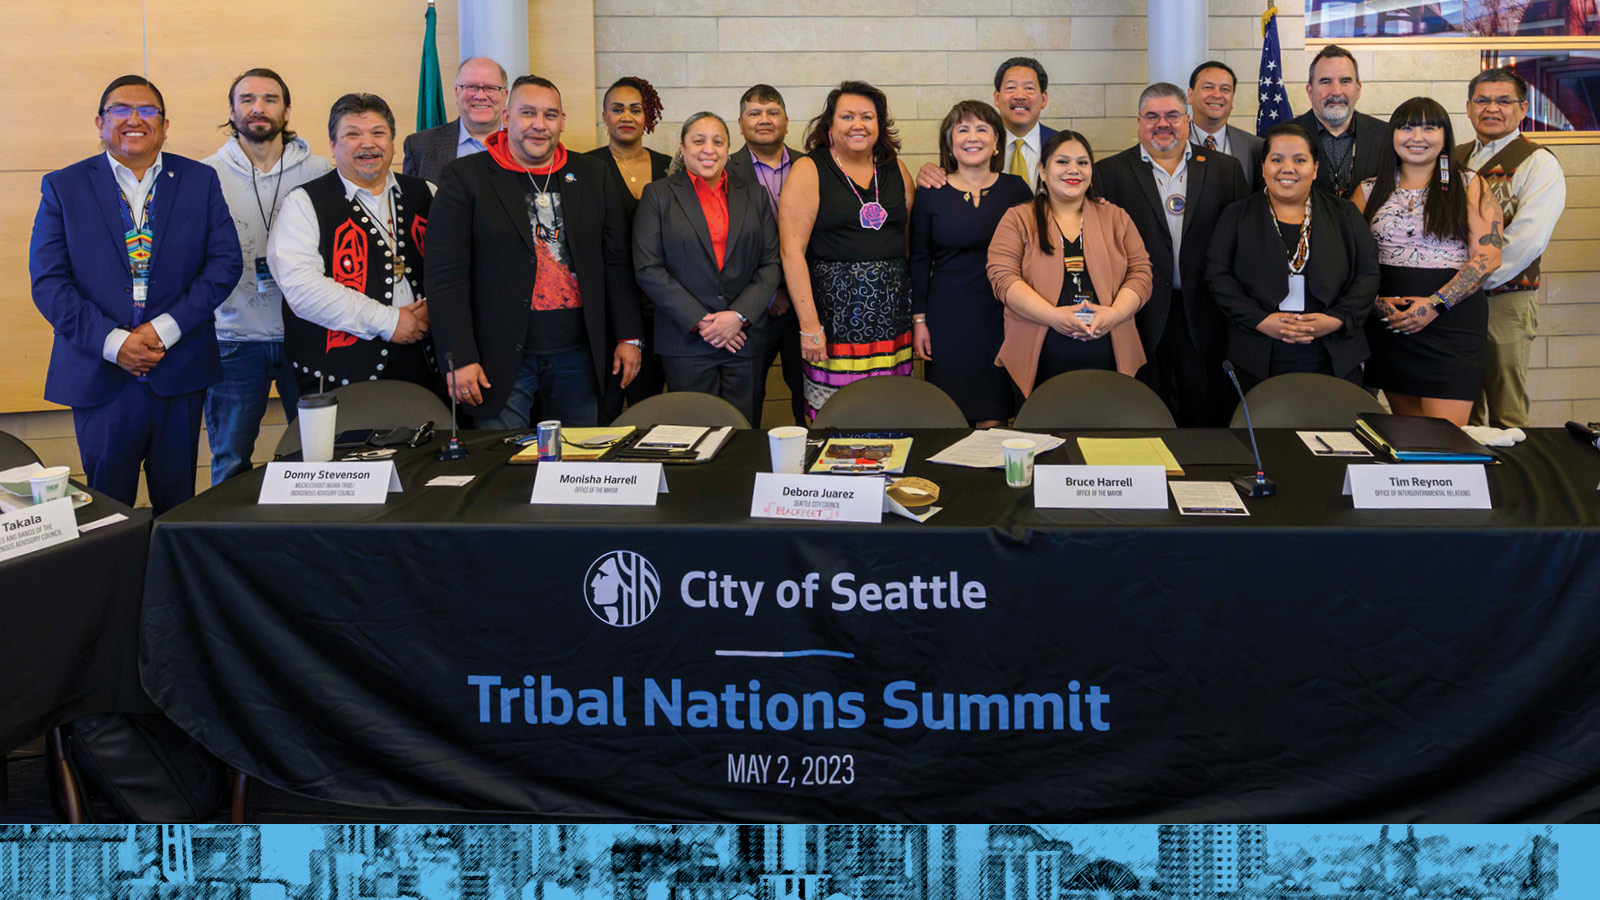 group of Indigenous and urban Native leaders standing with City of Seattle leaders behind a table. The table is draped with a black banner that reads 